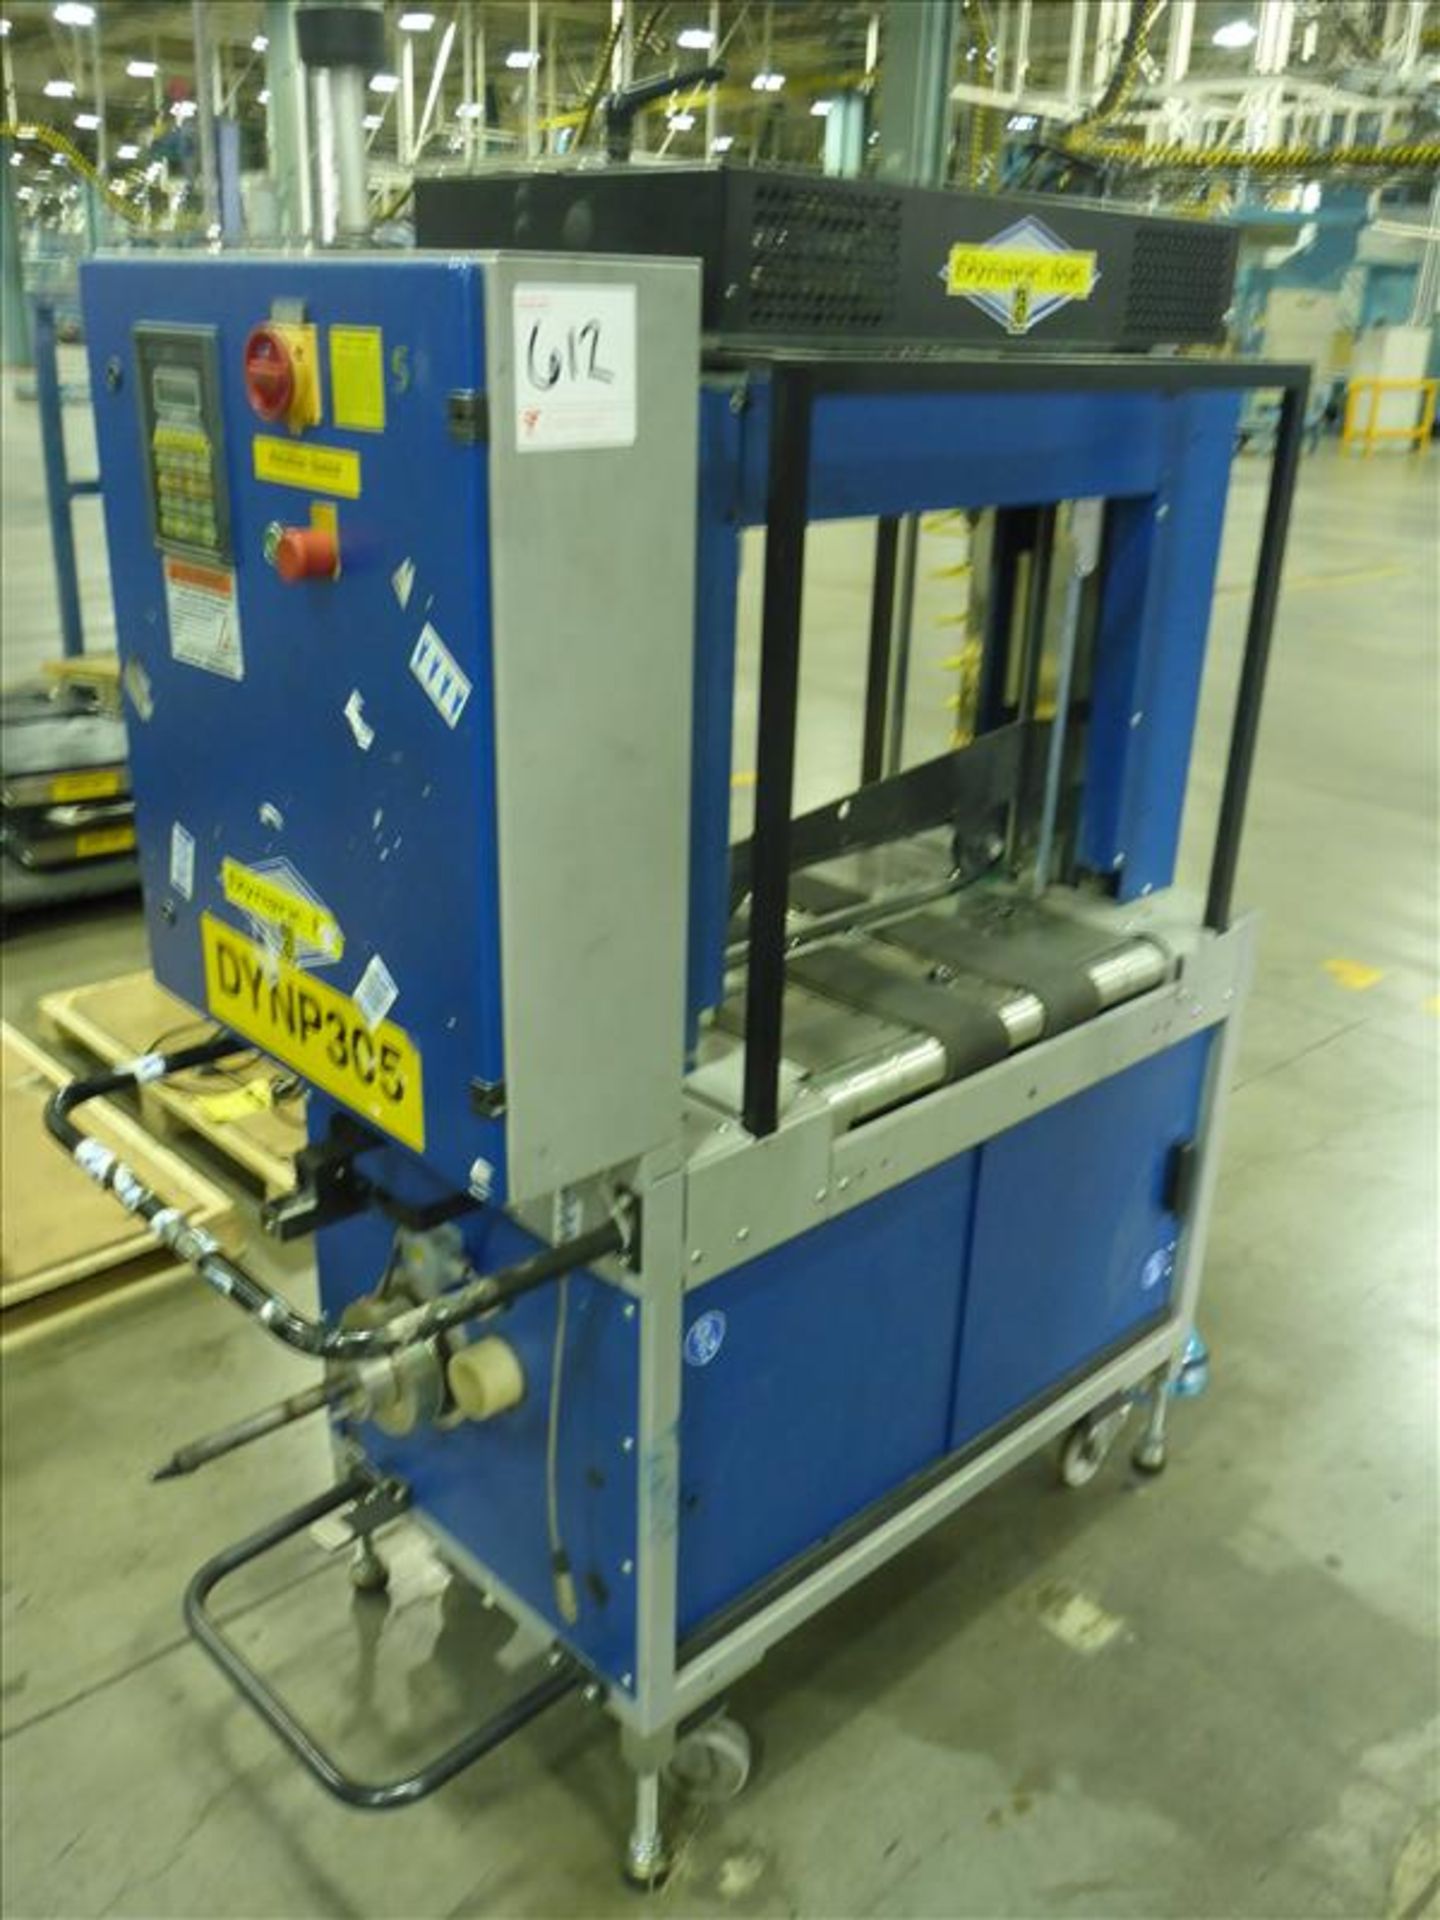 Dynaric high speed automatic strapping machine, NP-3, ser. No. 5005